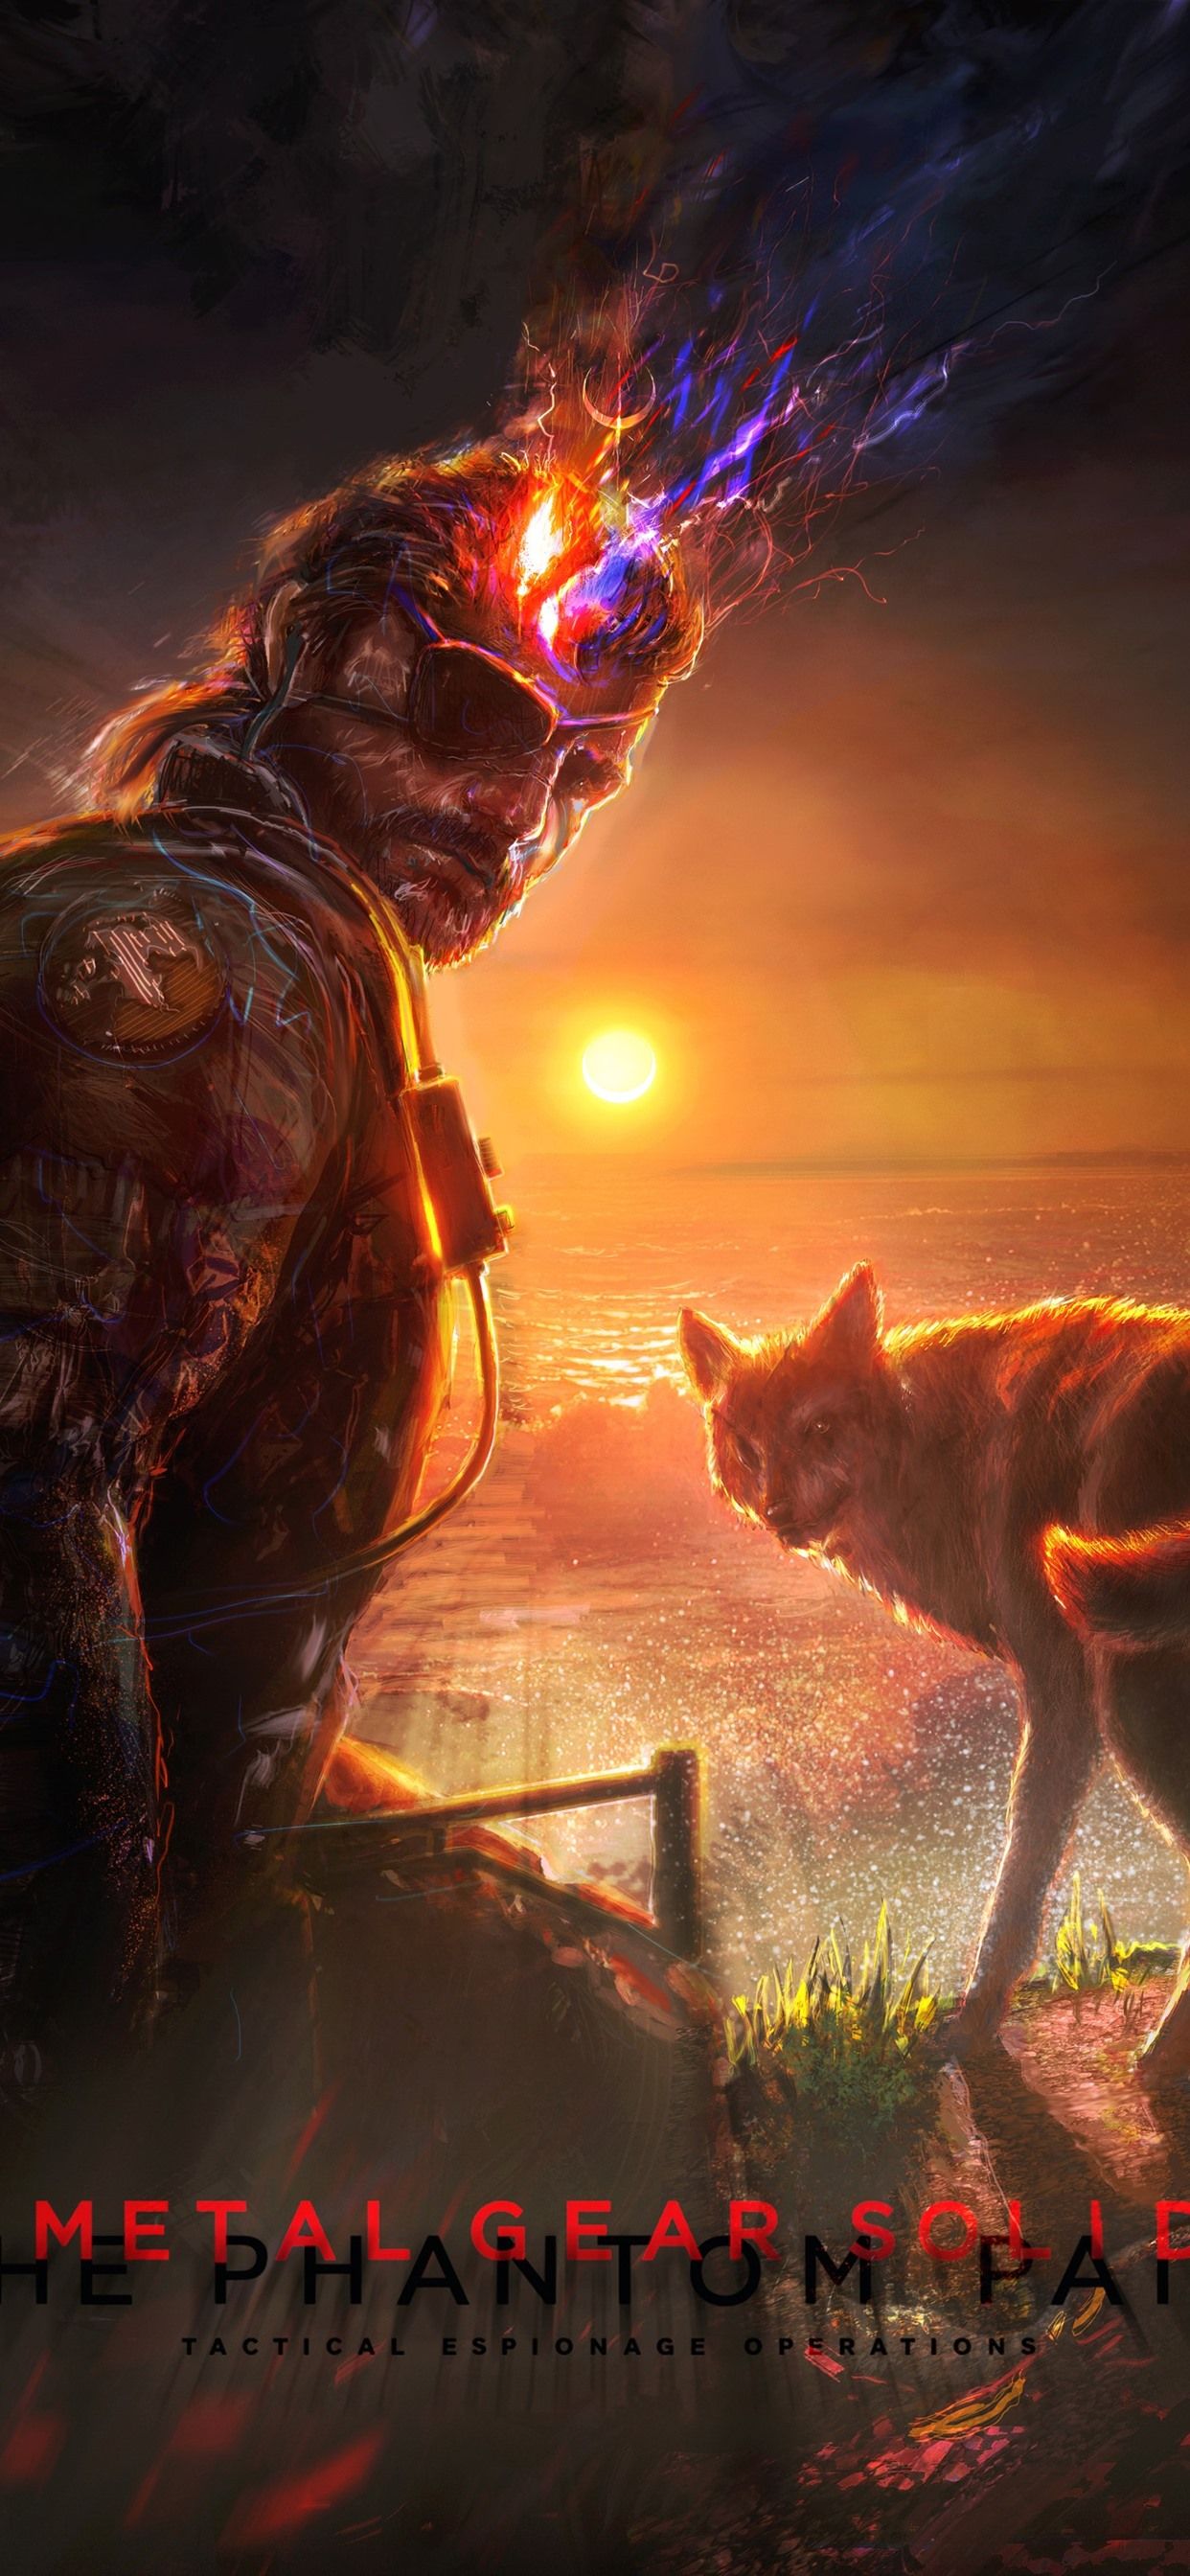 Metal Gear Solid, Art Picture 1242x2688 IPhone 11 Pro XS Max Wallpaper, Background, Picture, Image